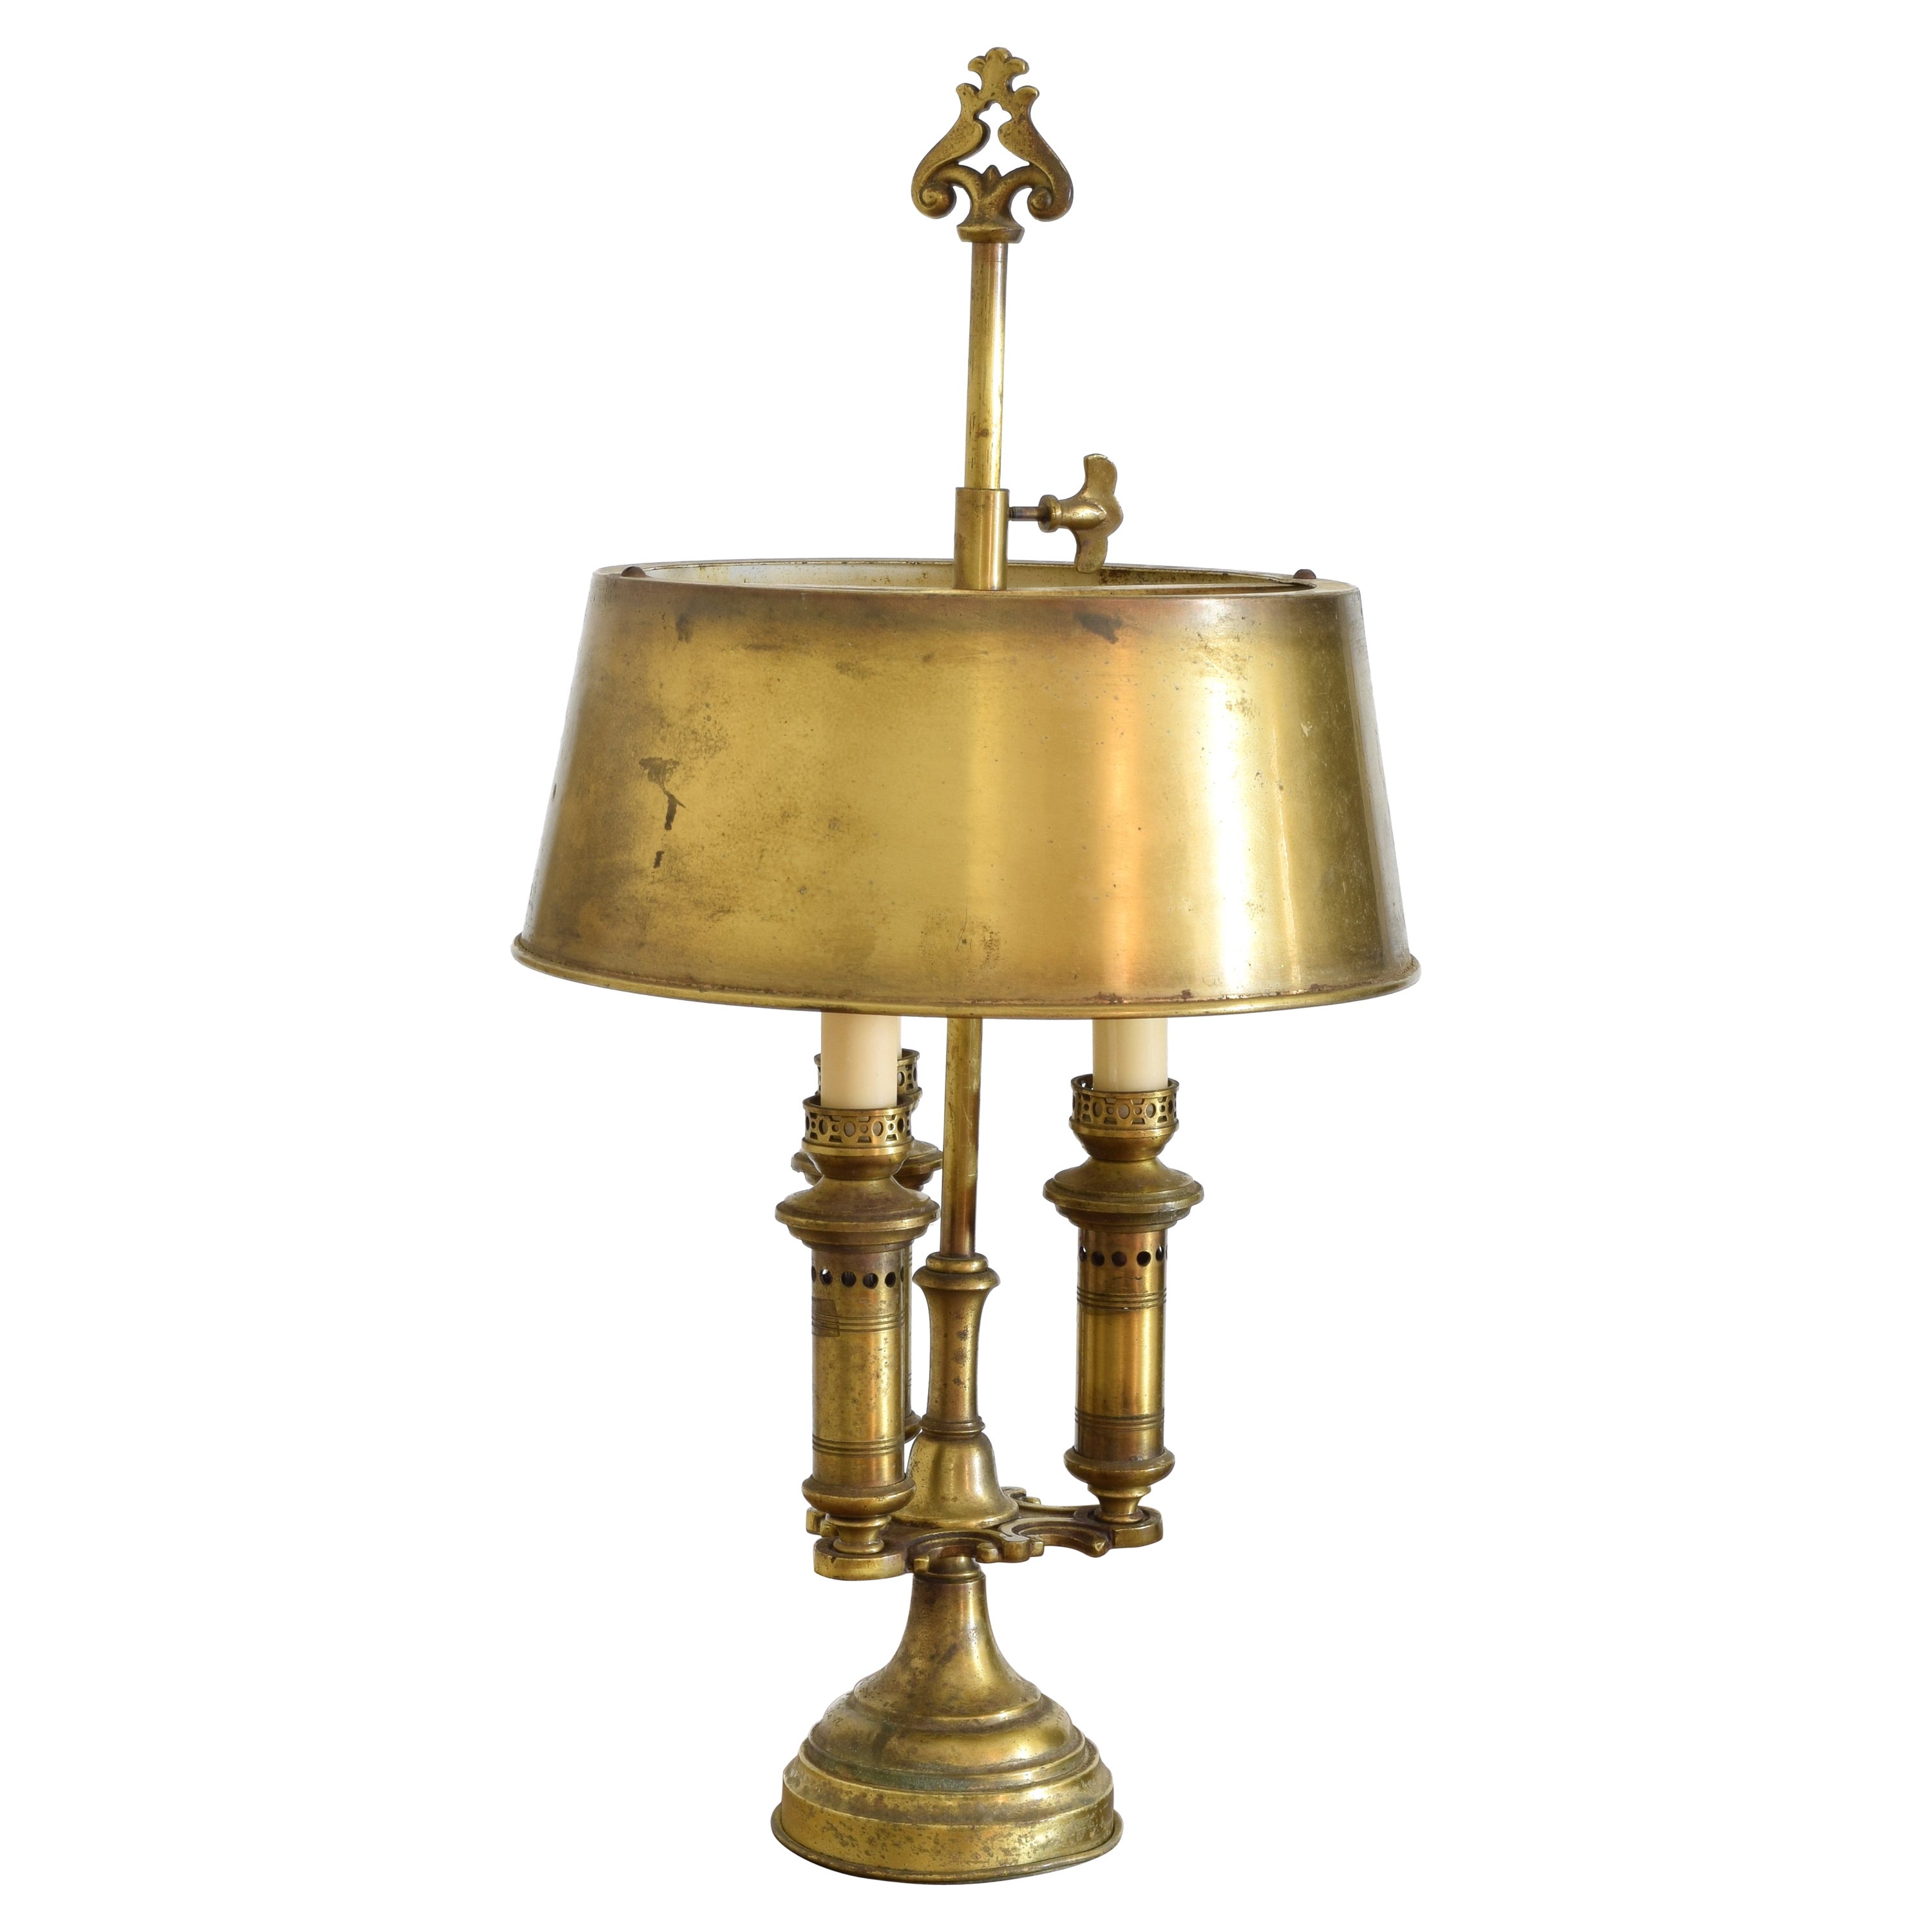 1830s Table Lamps